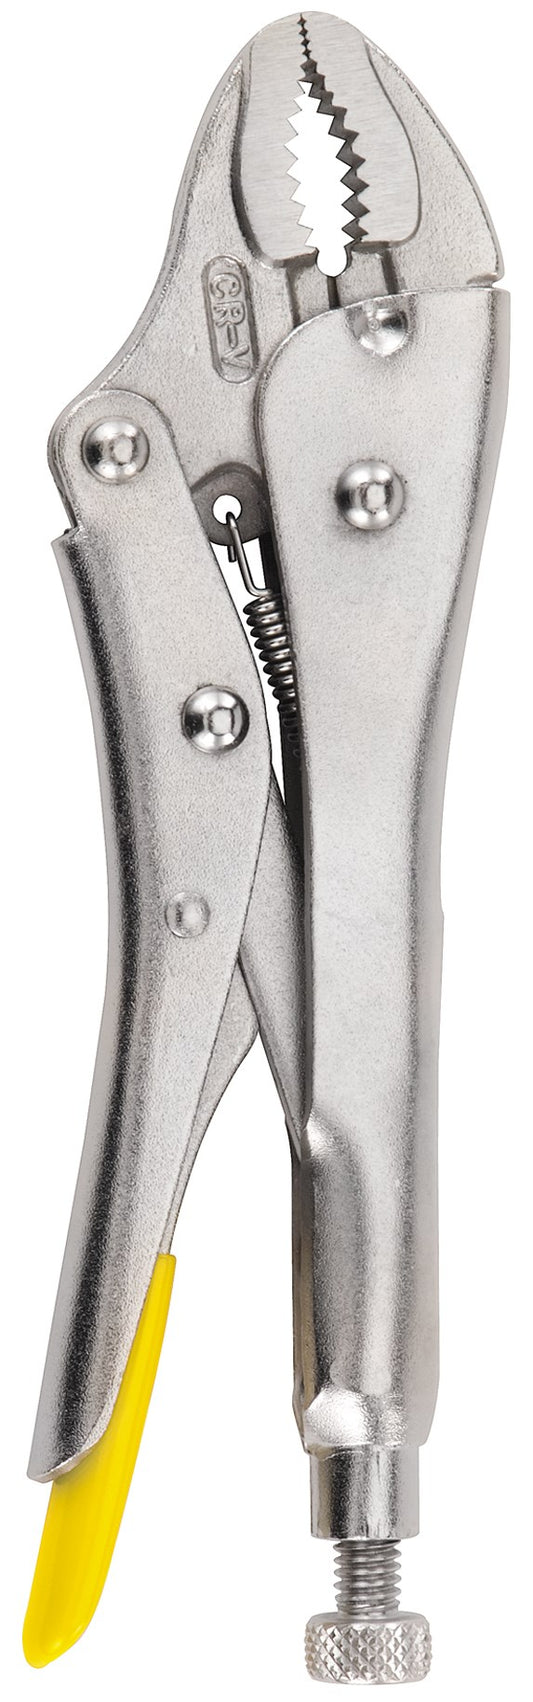 Stanley 84-807 5.6" Curved Plier